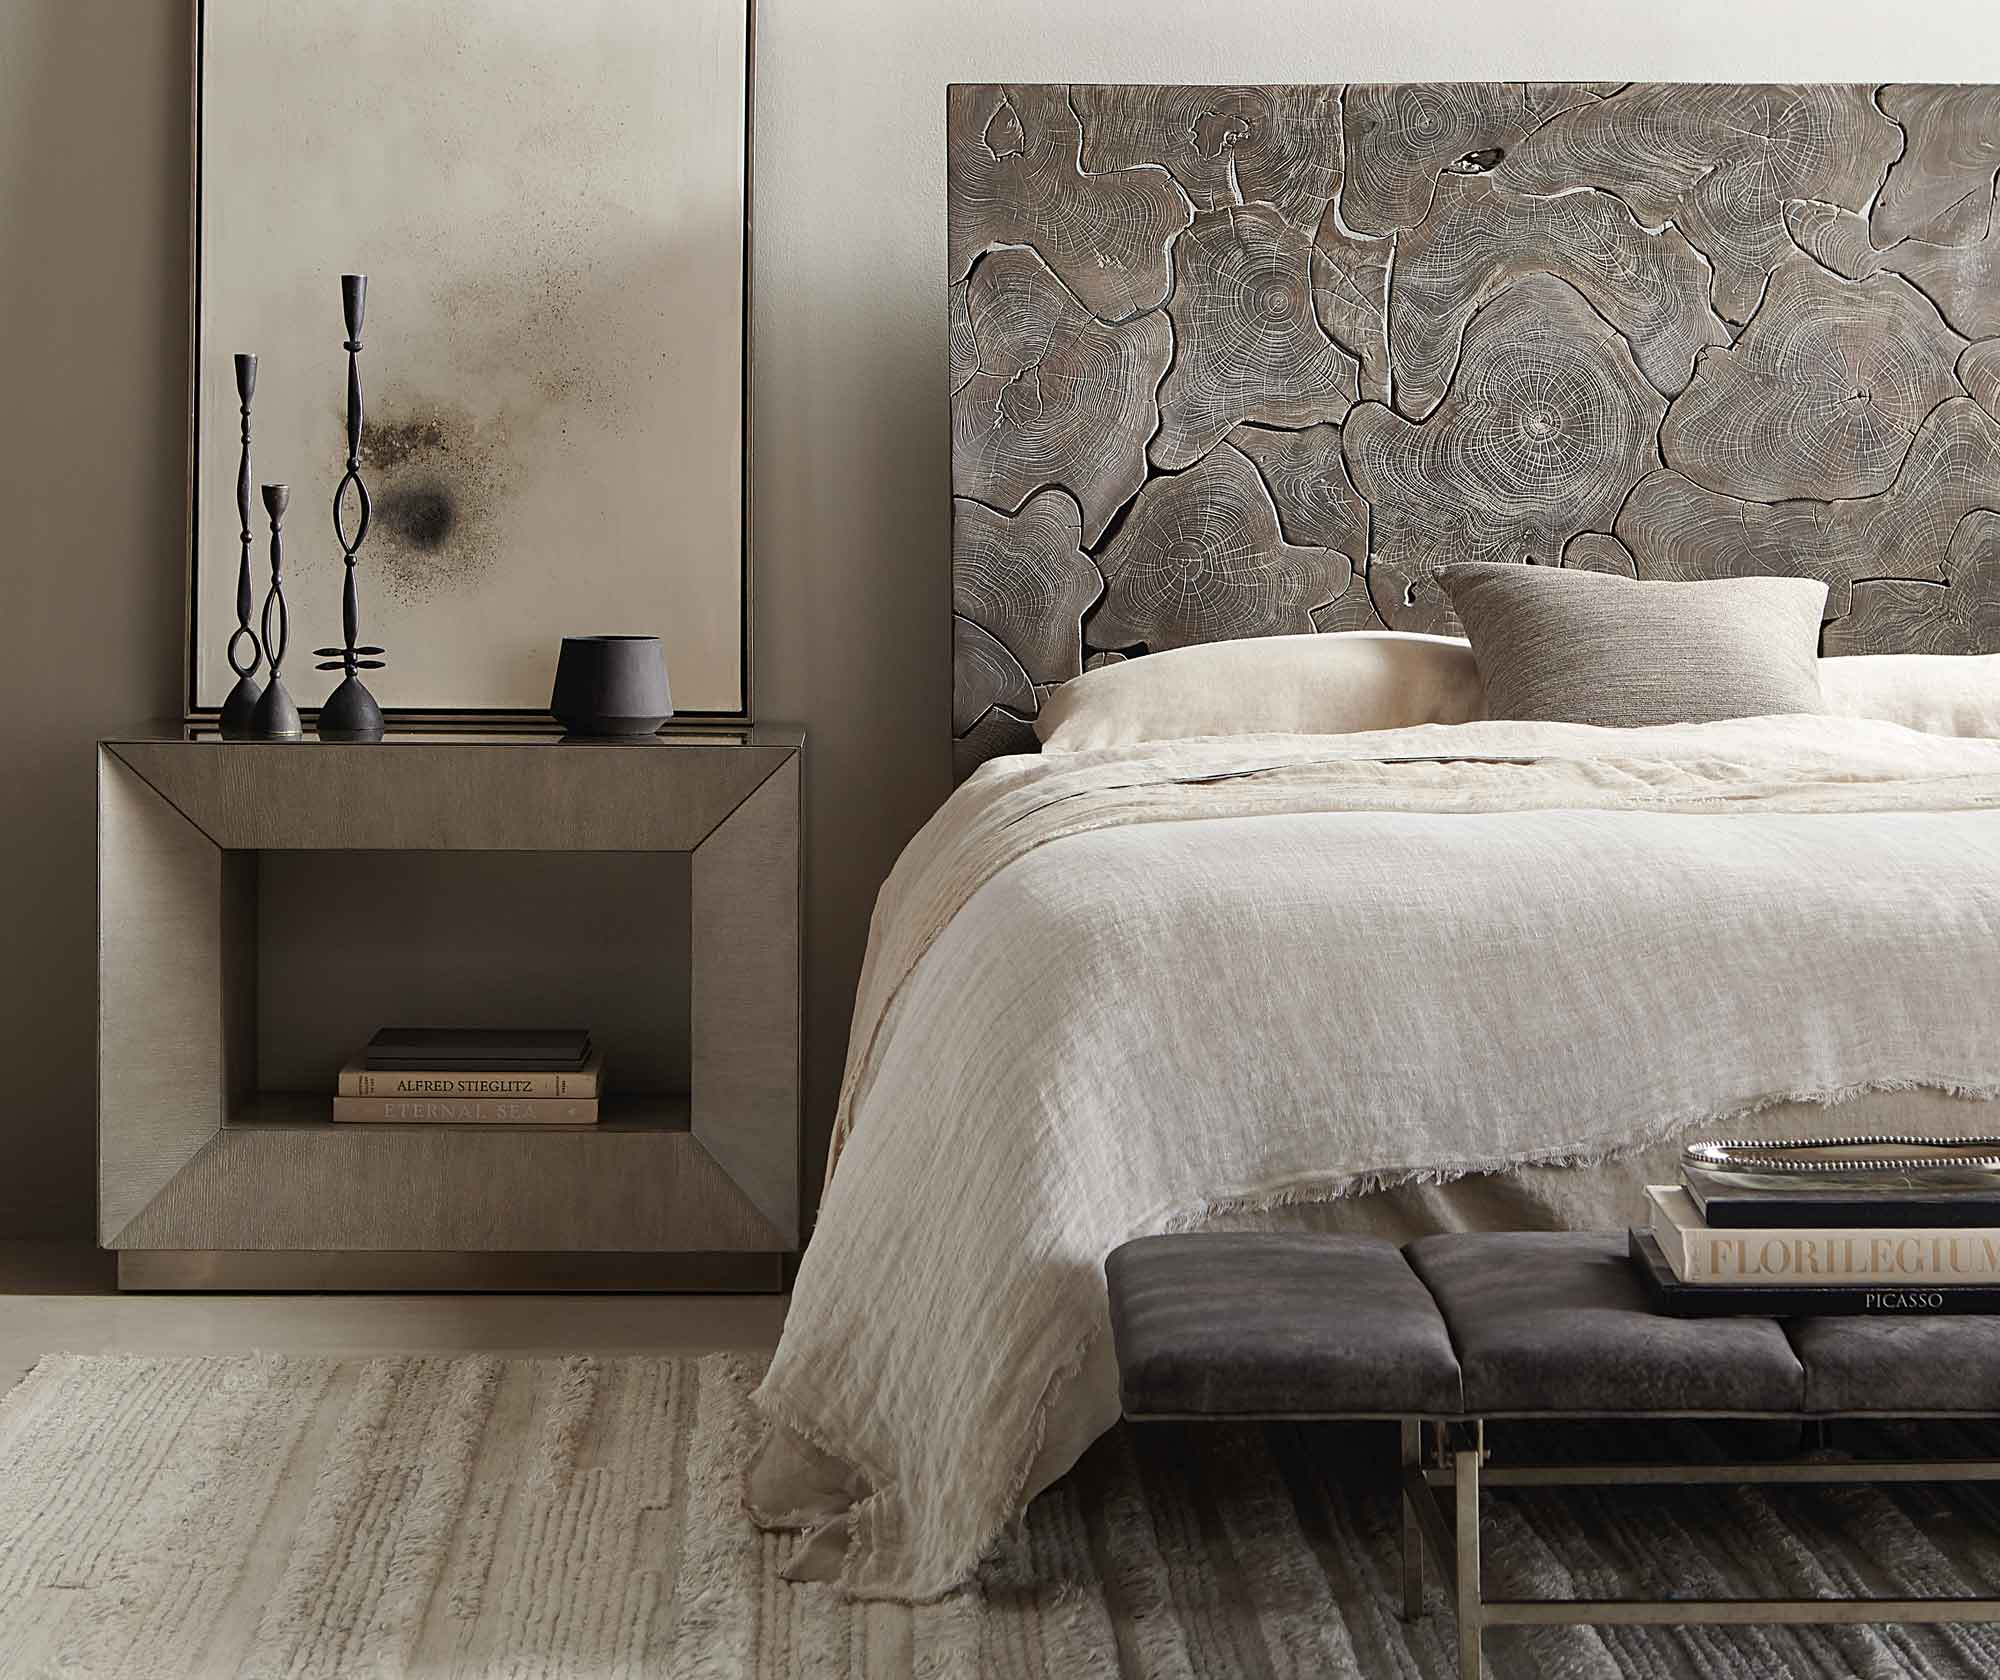 bed with wooden headboard and linens beside a rectangular nightstand with iron accessories and a bench at the end of the bed